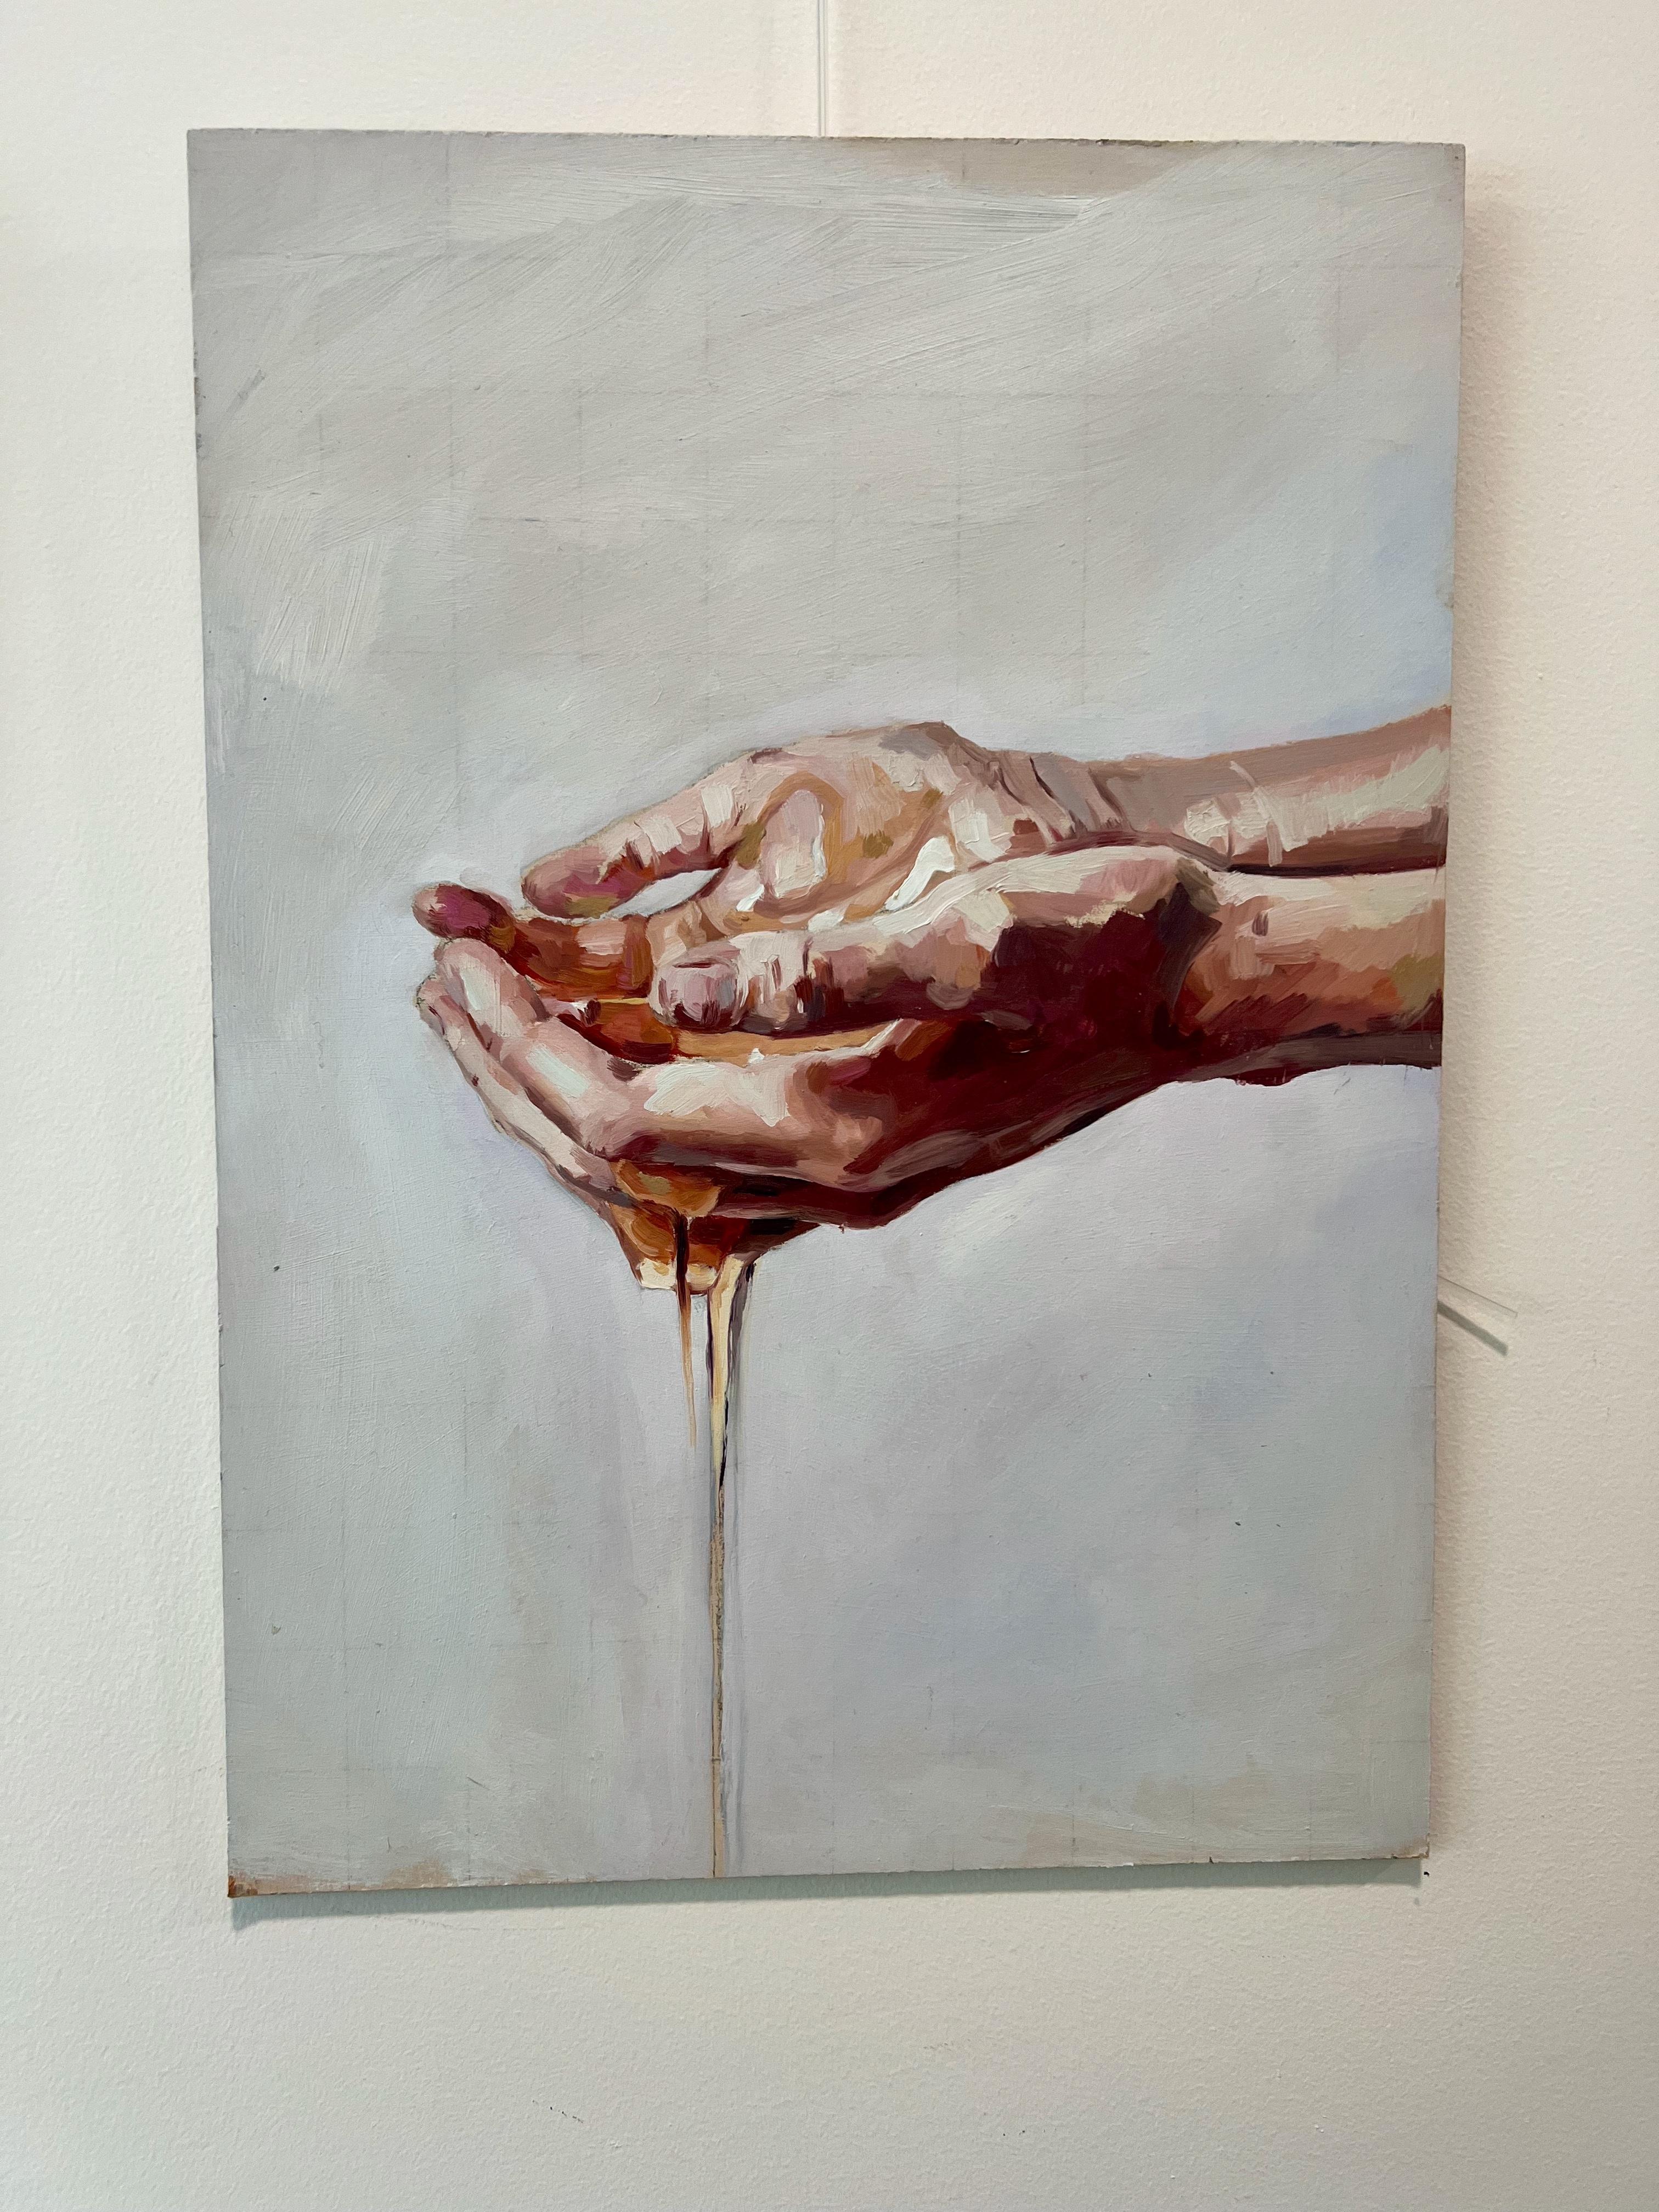 An oil painting featuring someone holding honey, which drips through their hands